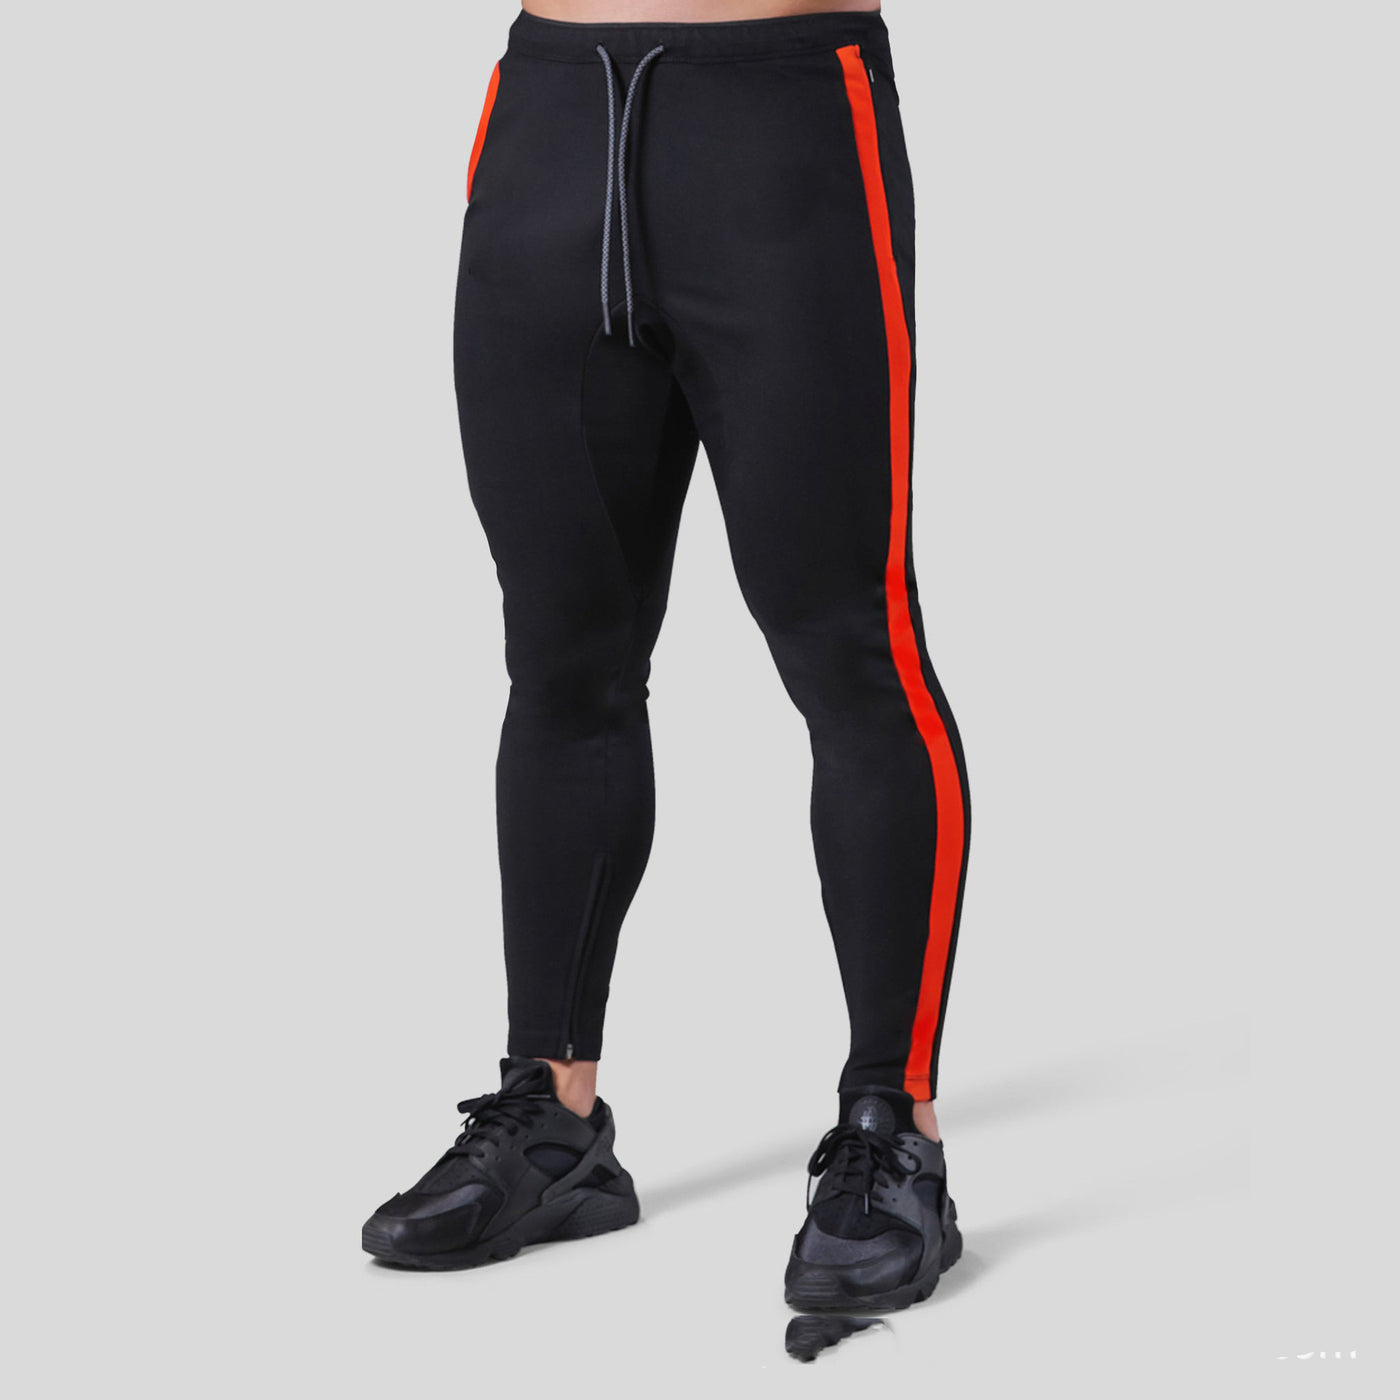 Men's Sports and Leisure Fitness Pants - Durable Polyester Gym Pants - Carvan Mart